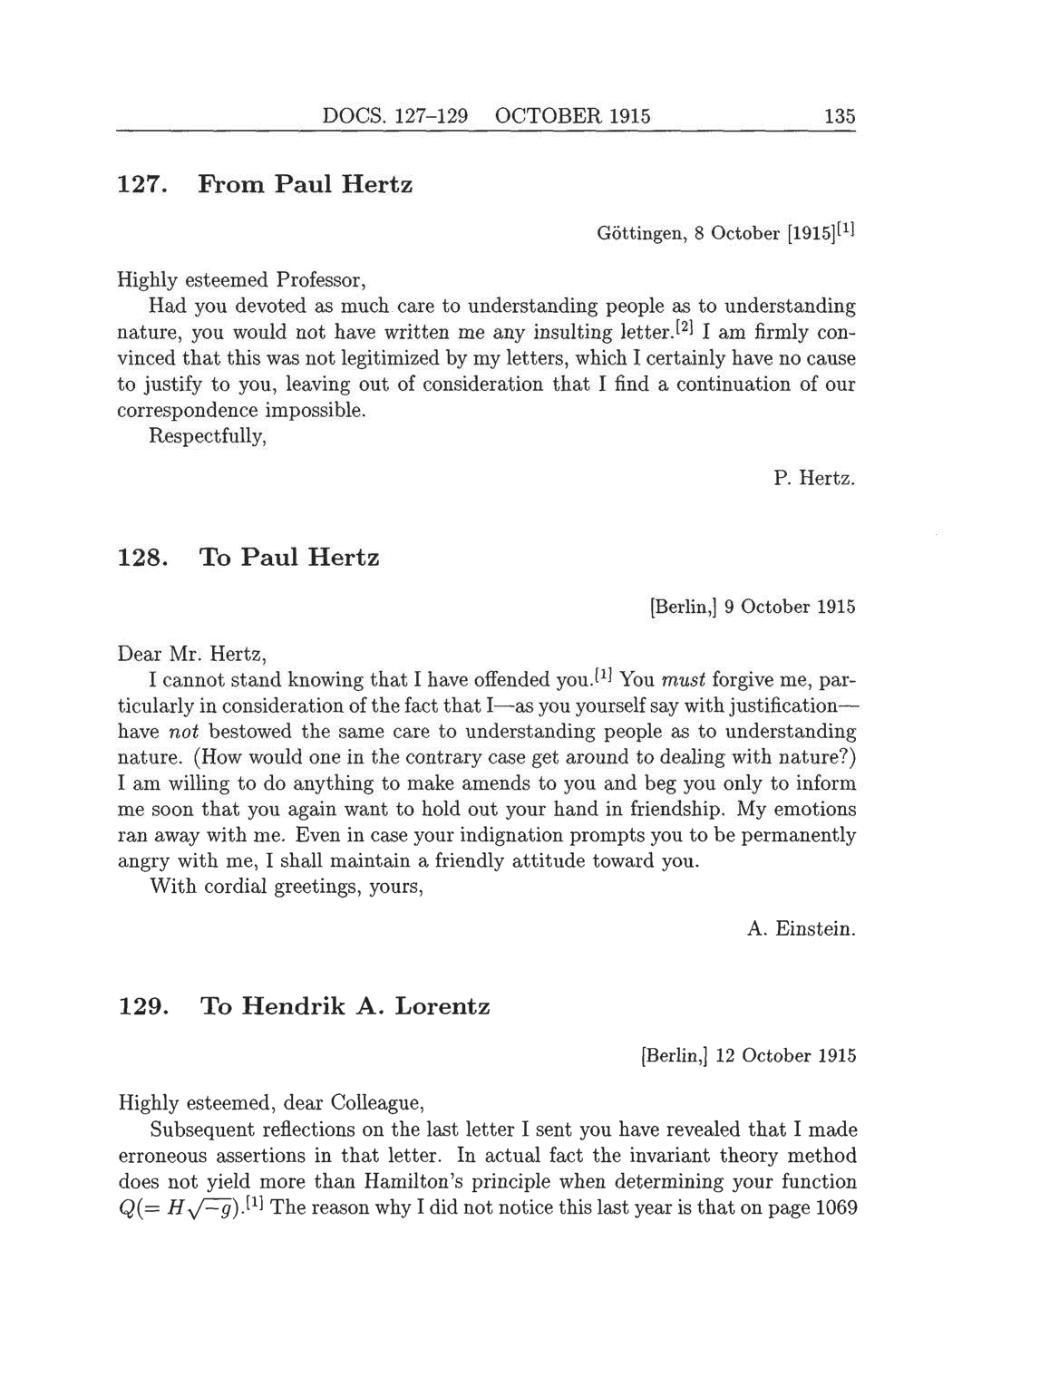 Volume 8: The Berlin Years: Correspondence, 1914-1918 (English translation supplement) page 135